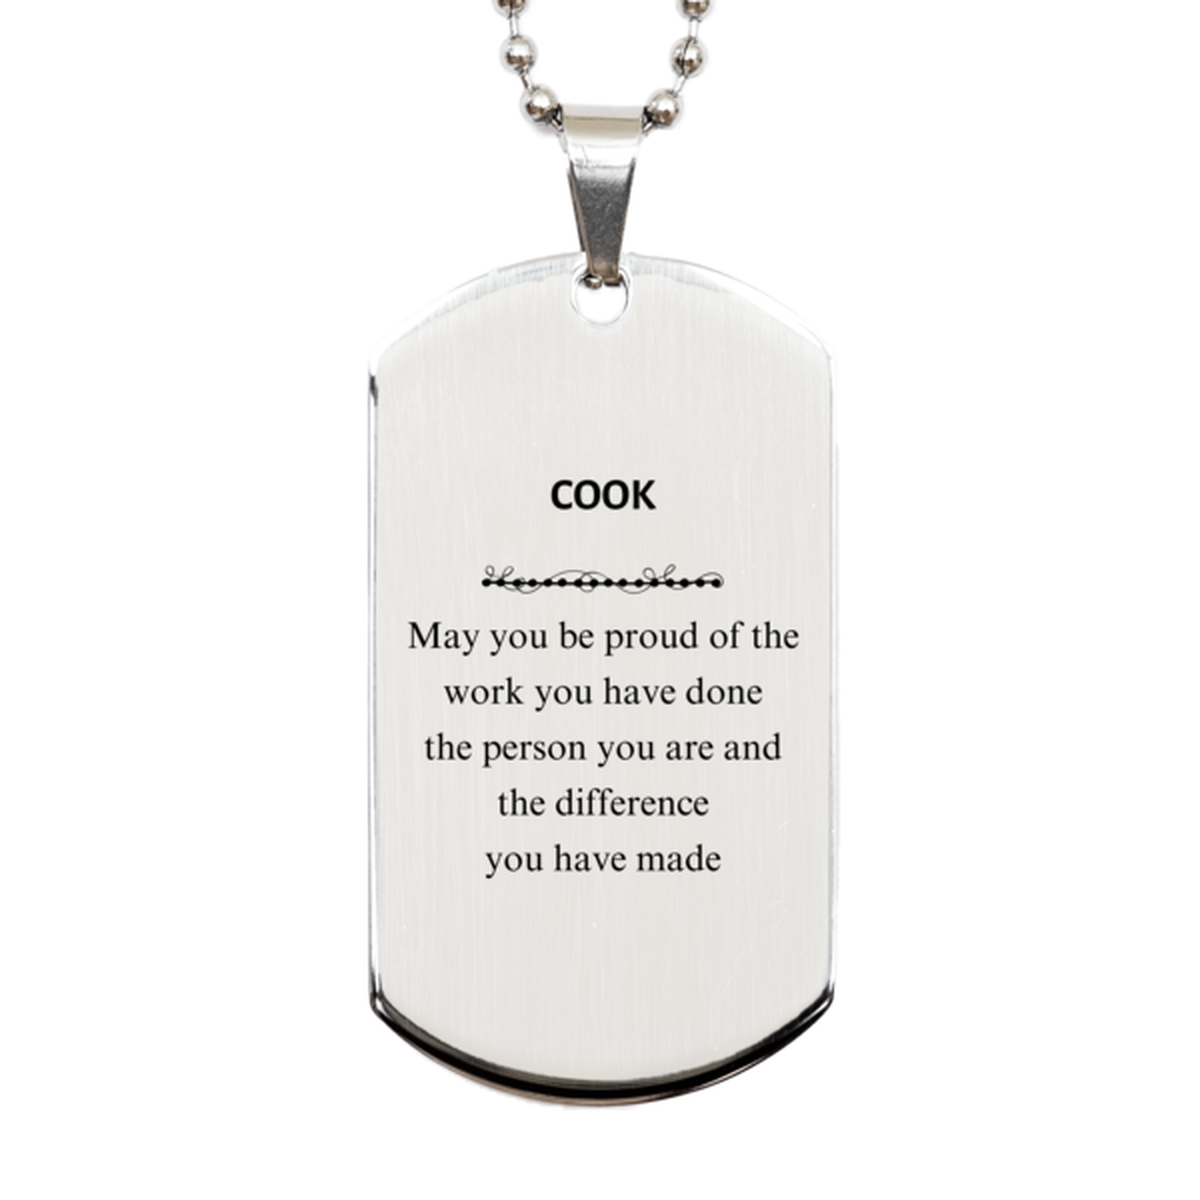 Cook May you be proud of the work you have done, Retirement Cook Silver Dog Tag for Colleague Appreciation Gifts Amazing for Cook